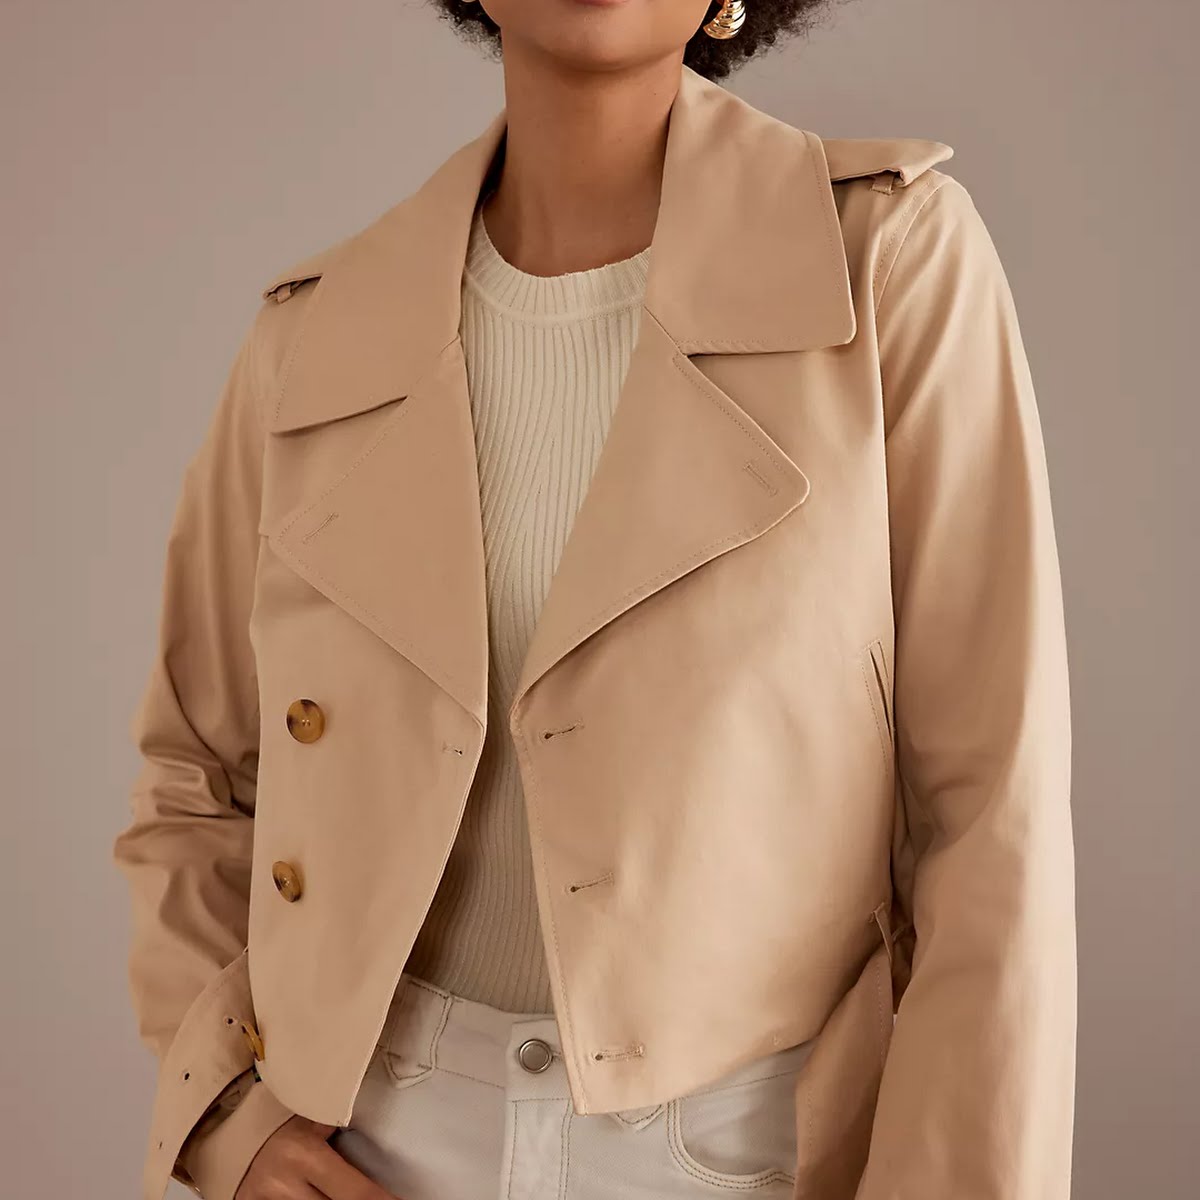 Anthropologie Good American Cropped Belted Trench Coat, €220